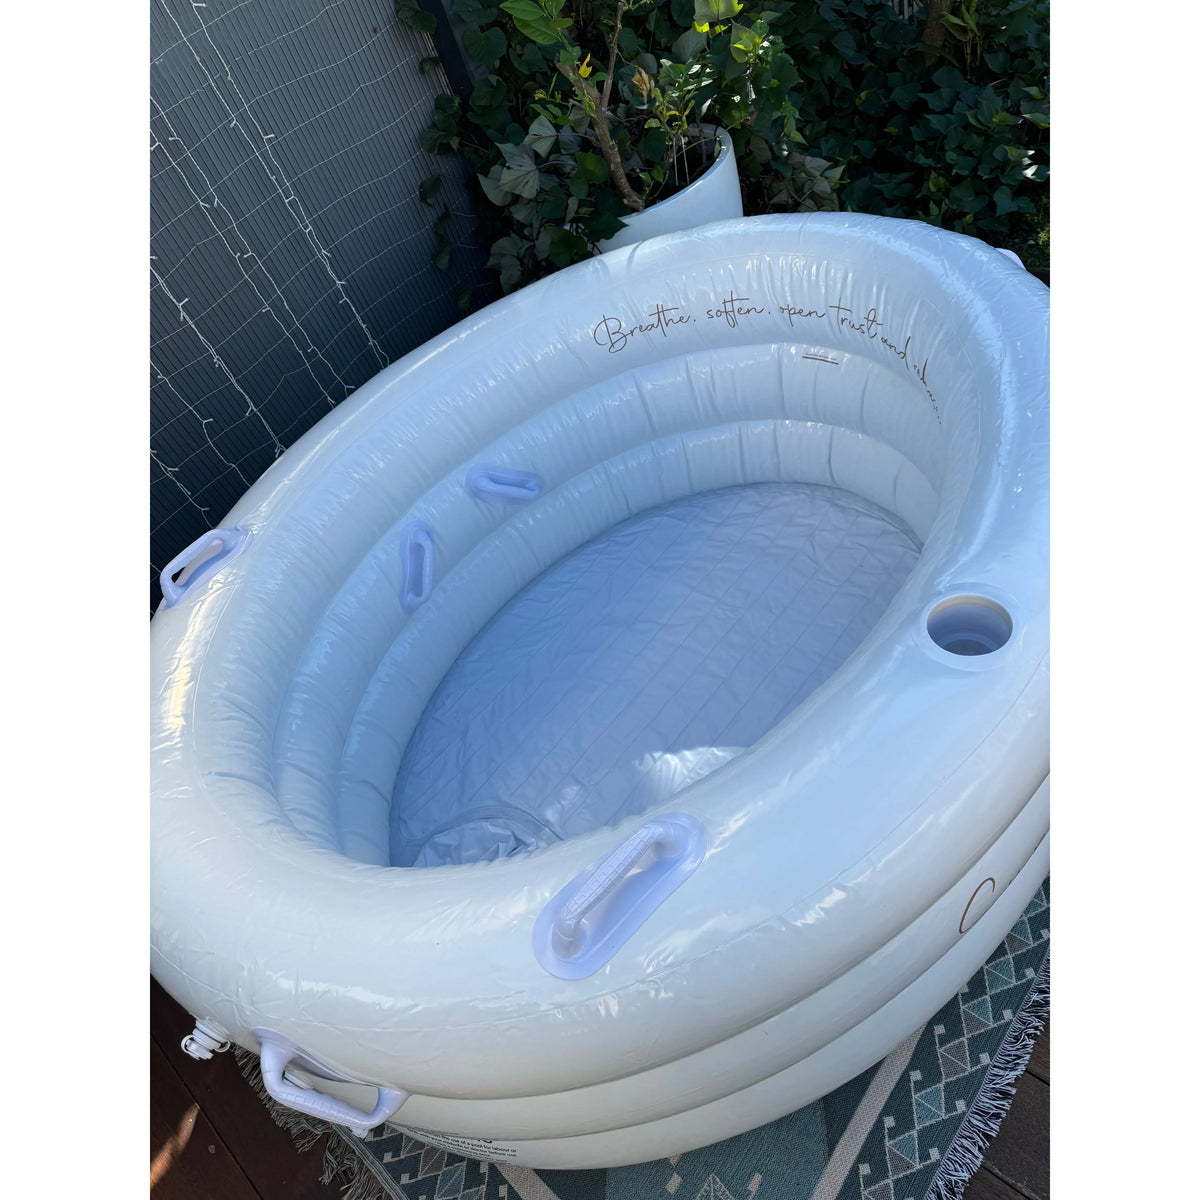 Surrender Birth Pool HIRE ONLY - White